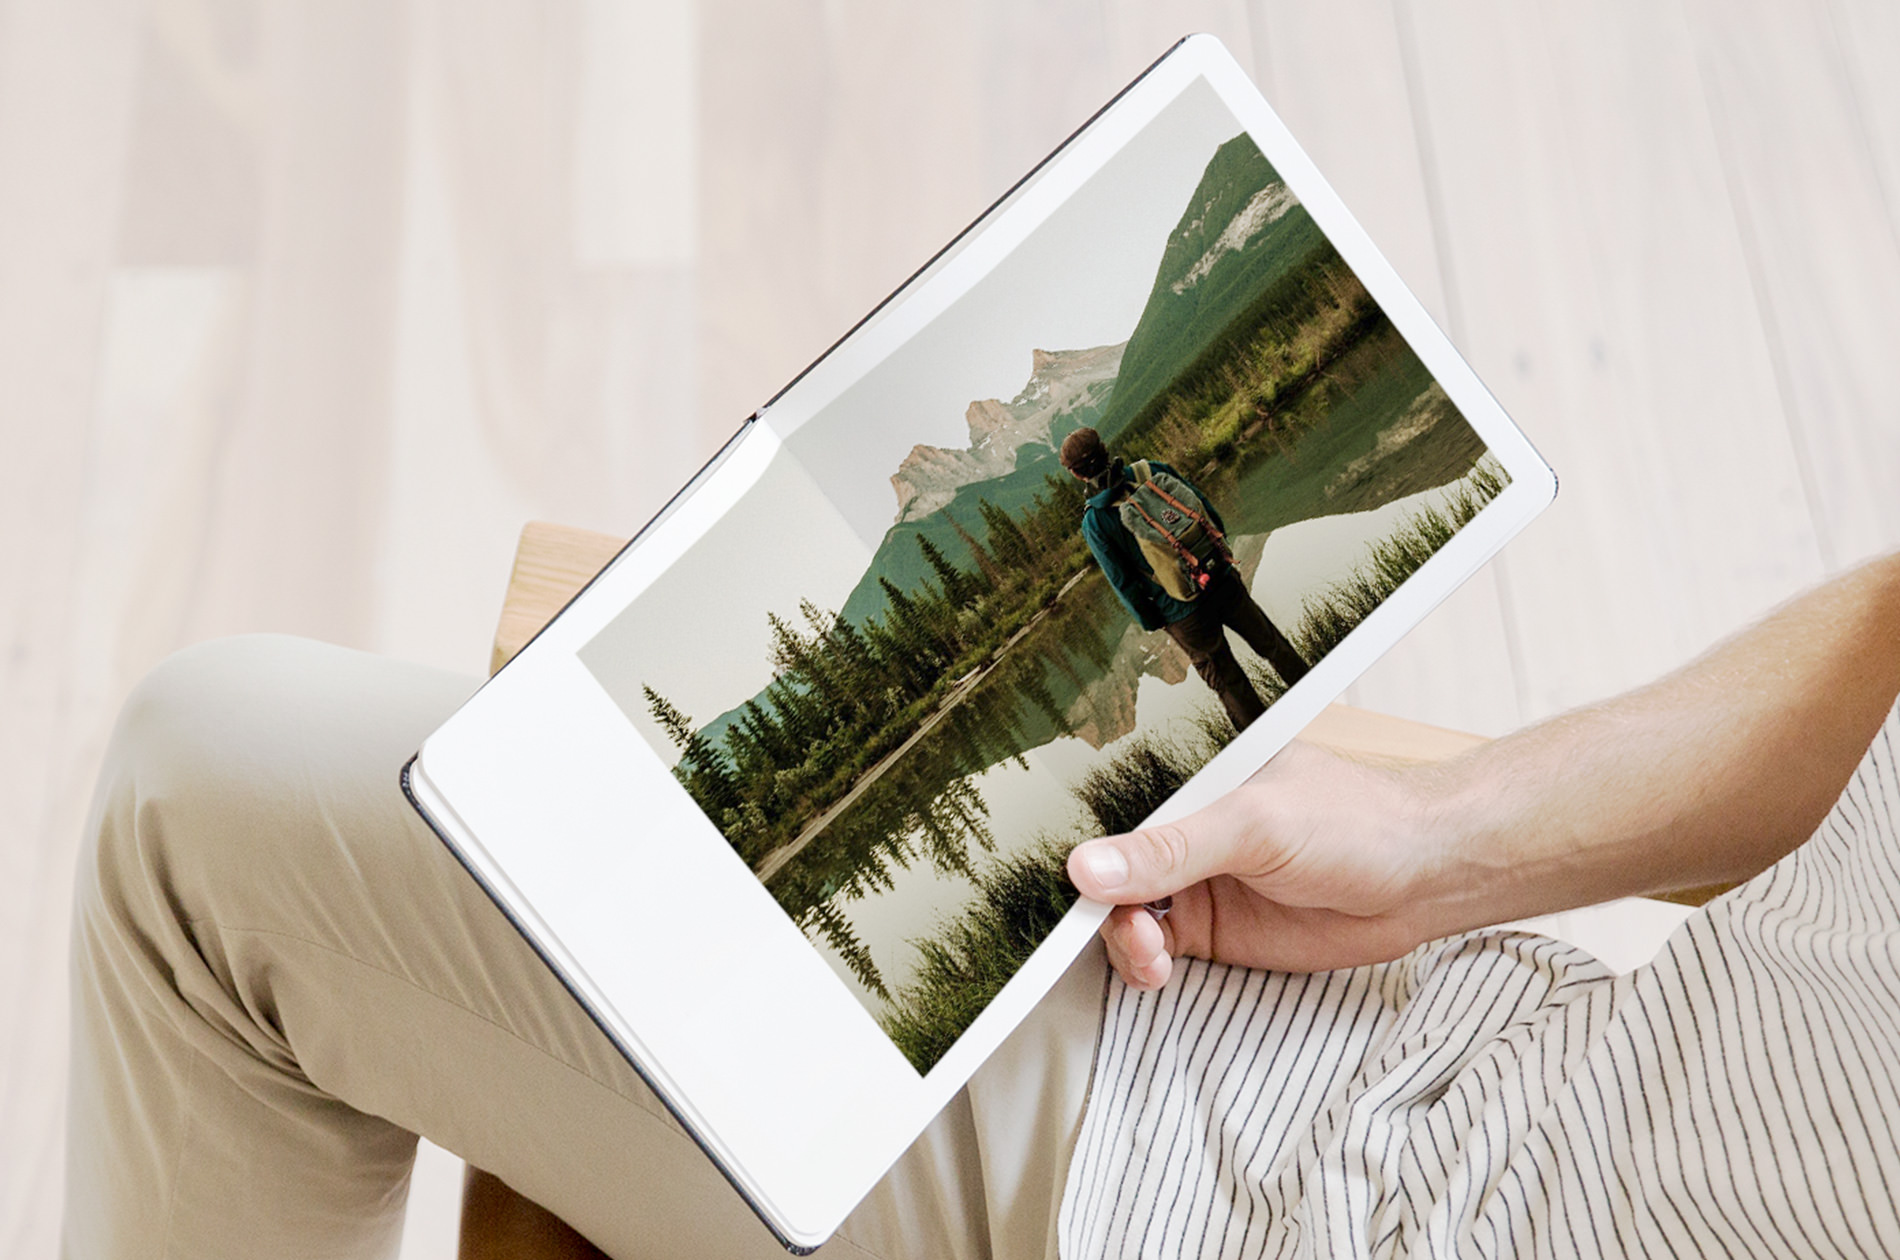 Male holding an open Moleskine Photo Book with an image of person overlooking a lake and forest landscape.